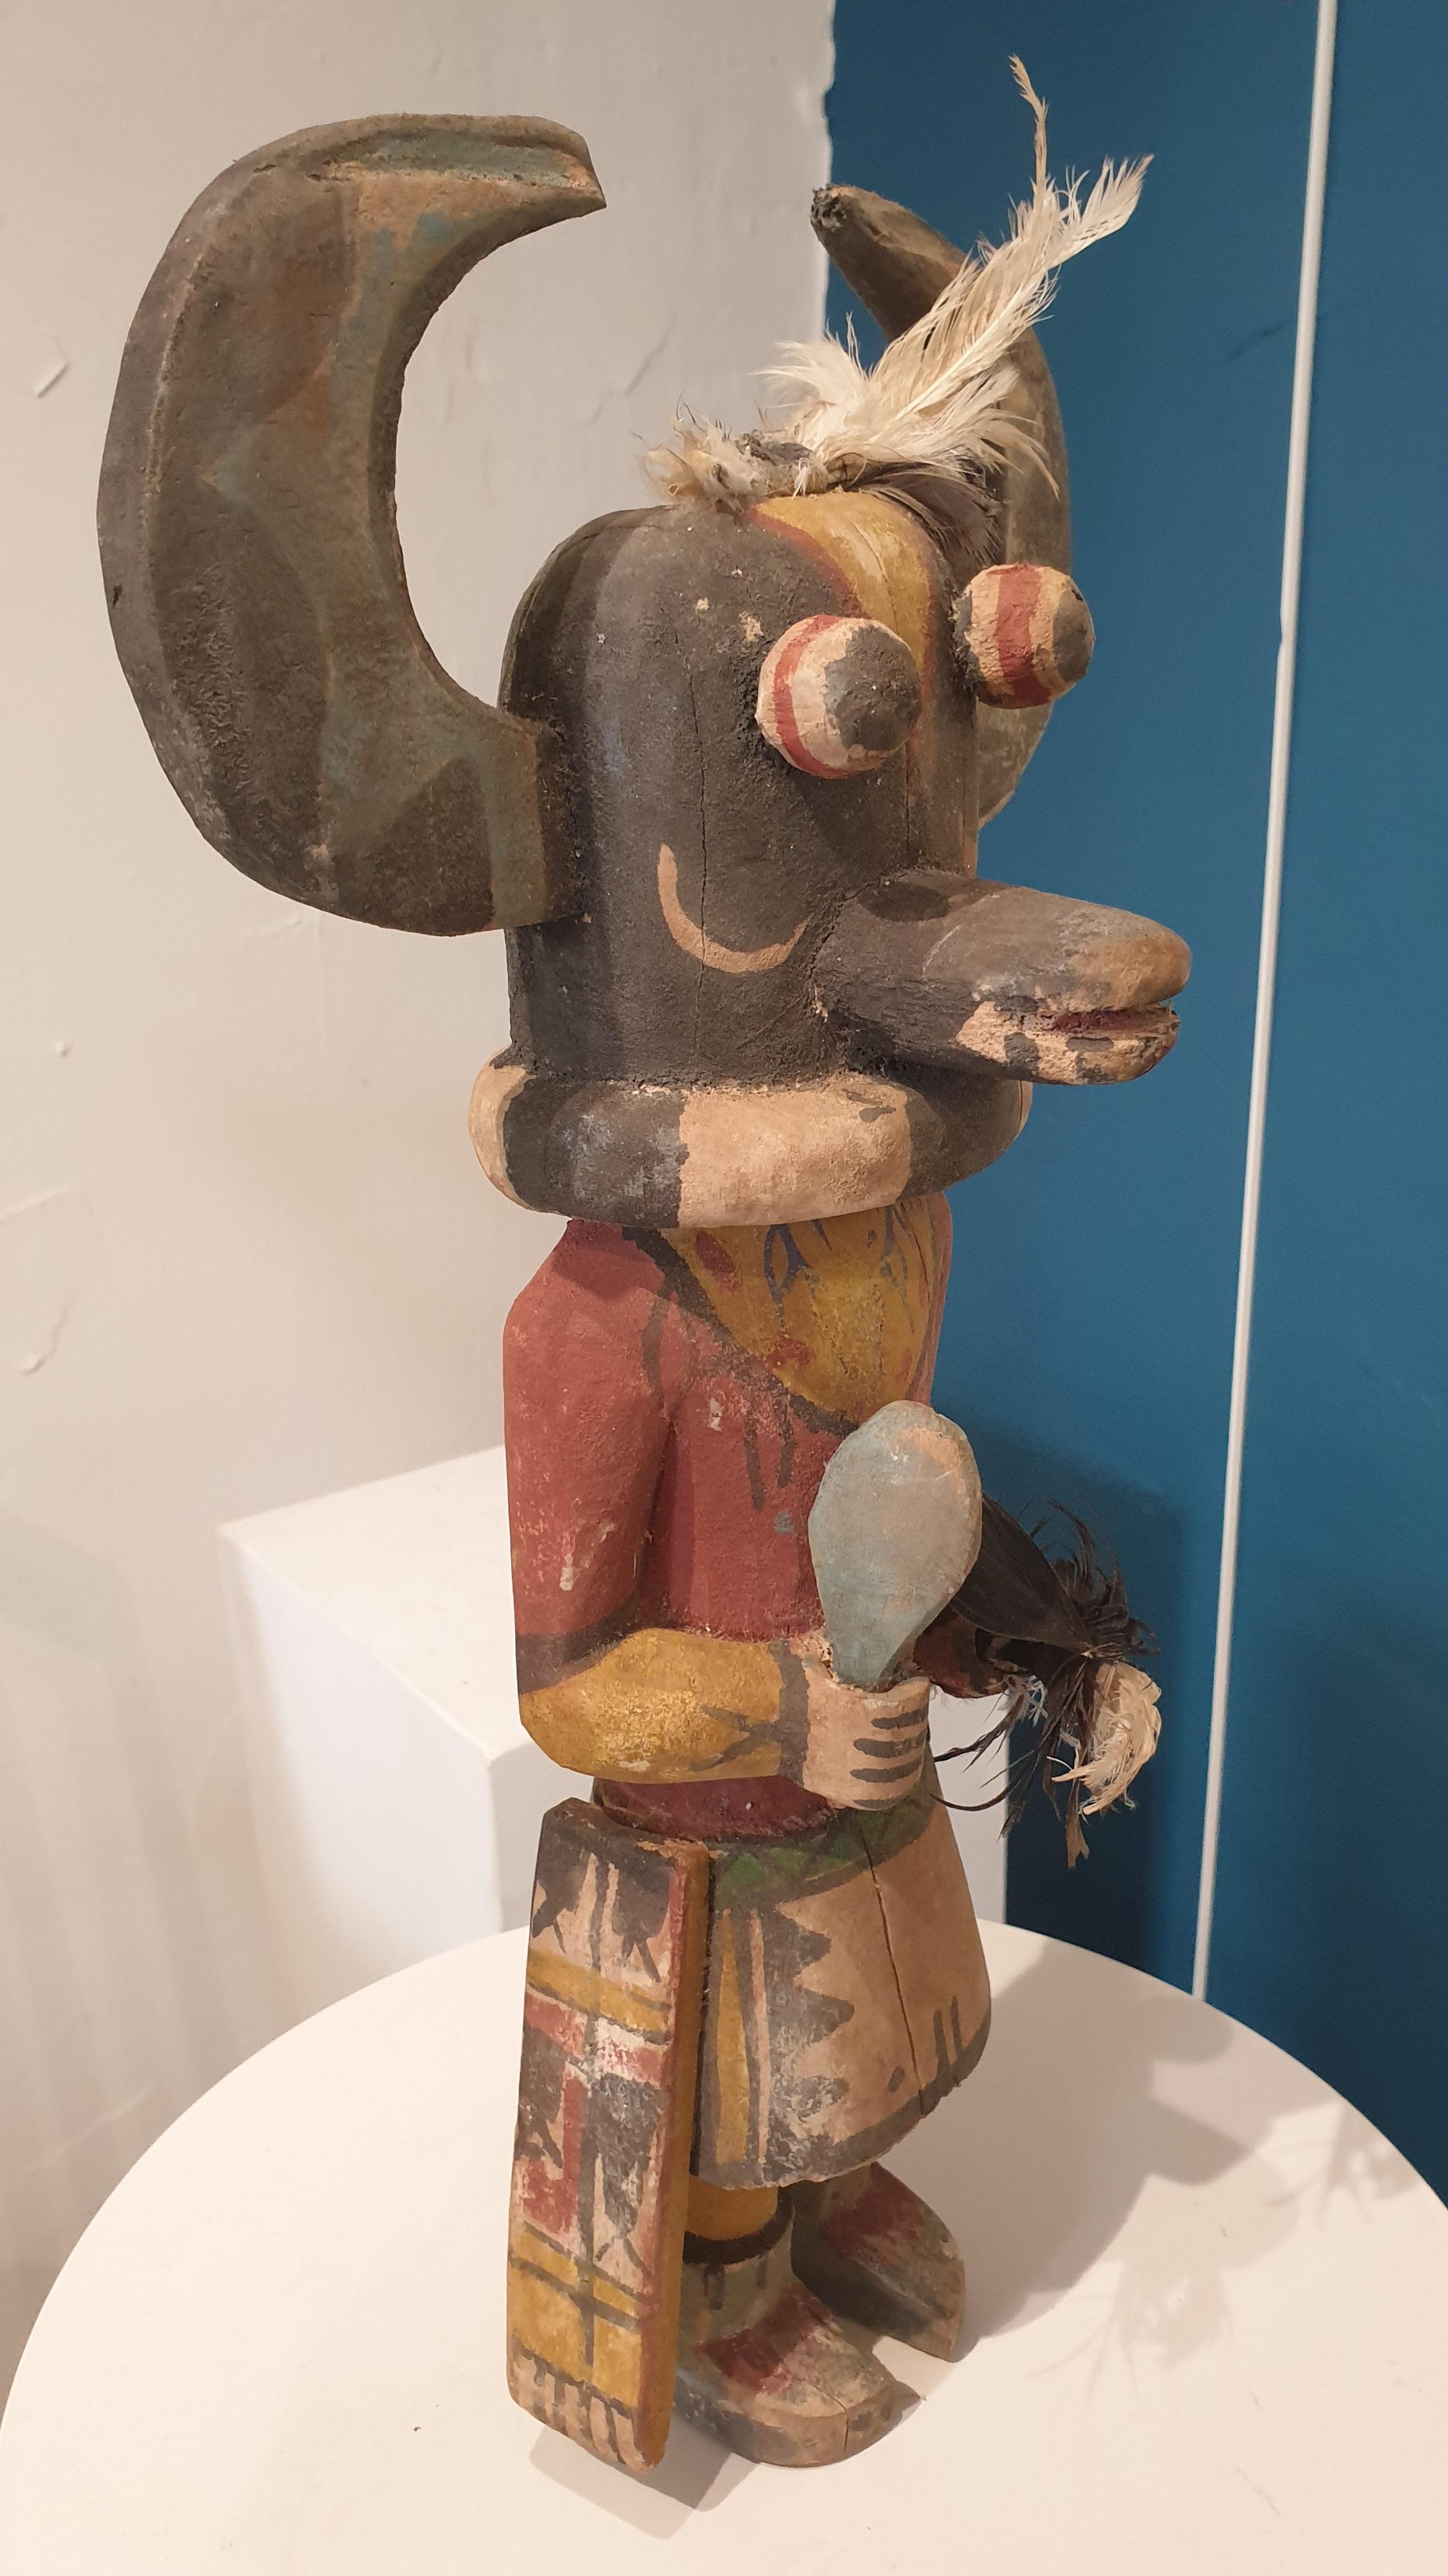 Native North American carved wood and painted effigy figure, Hopi Katsina or Kachina doll. This is one of a group of eight dolls all individually priced, or available as a set, and on 1stdibs.

Hopi Katsina dolls are wooden effigies of the Katsinam